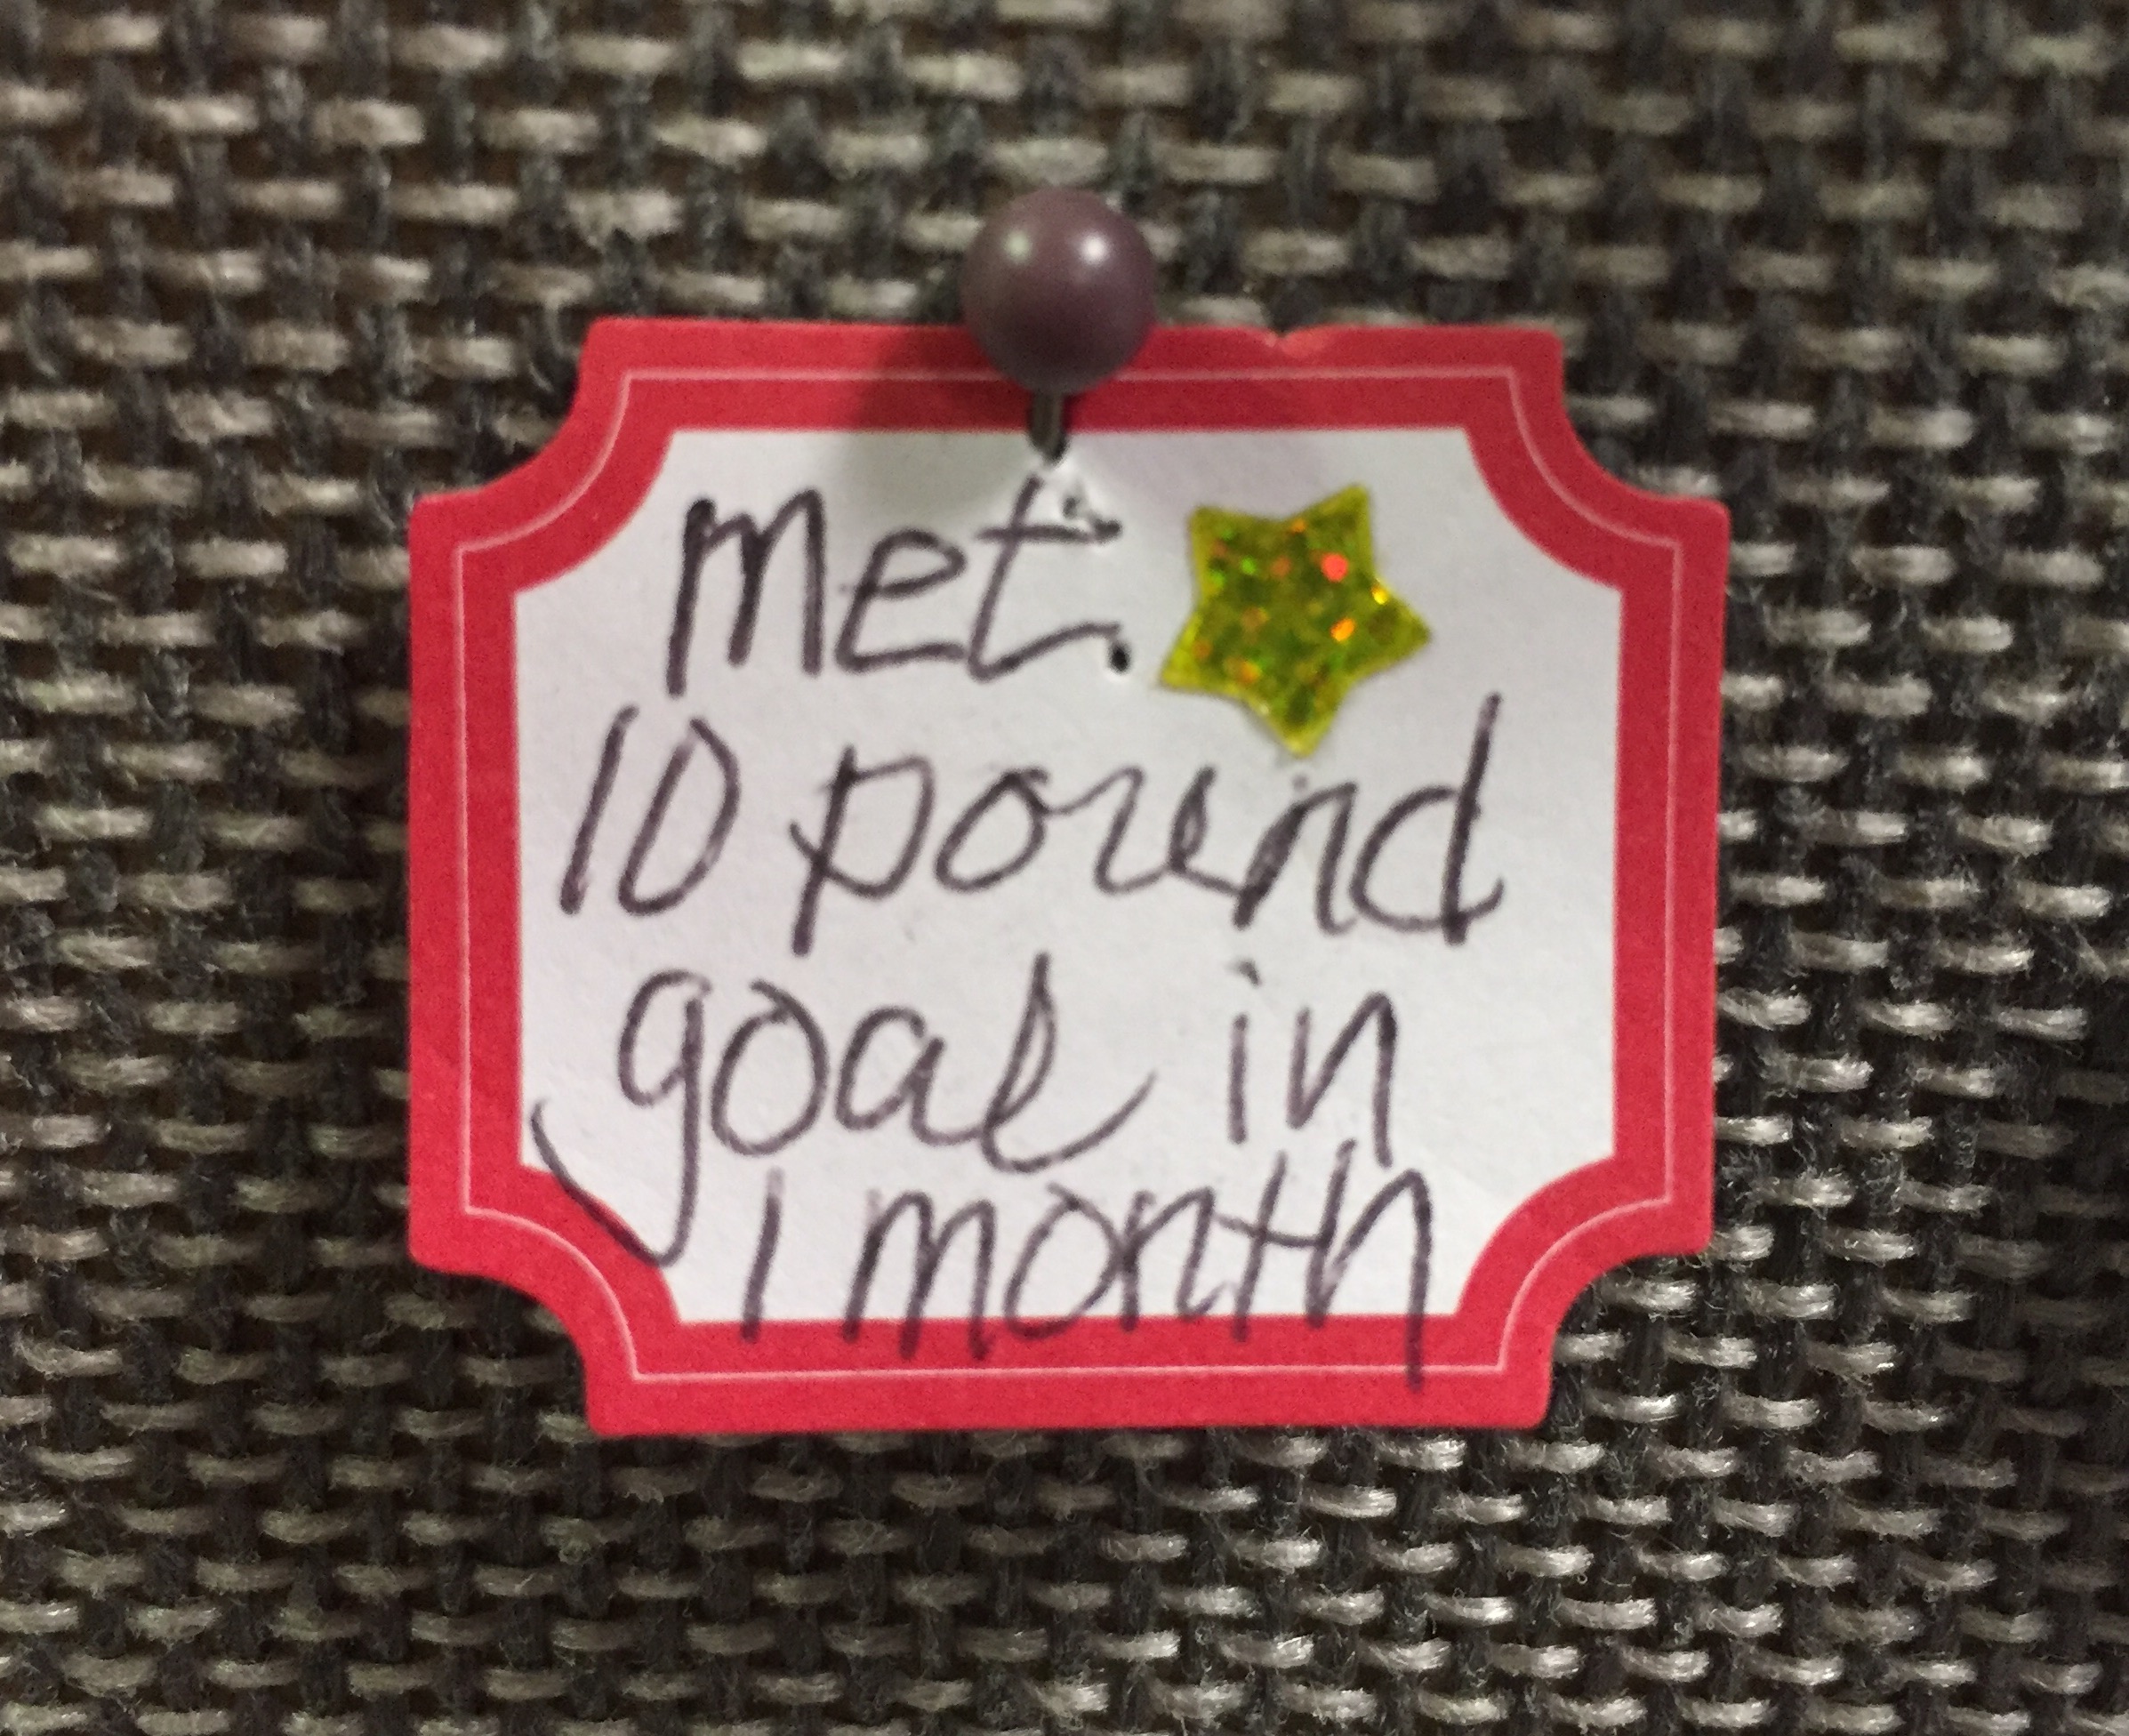 Met 10 pound goal in 1 month!